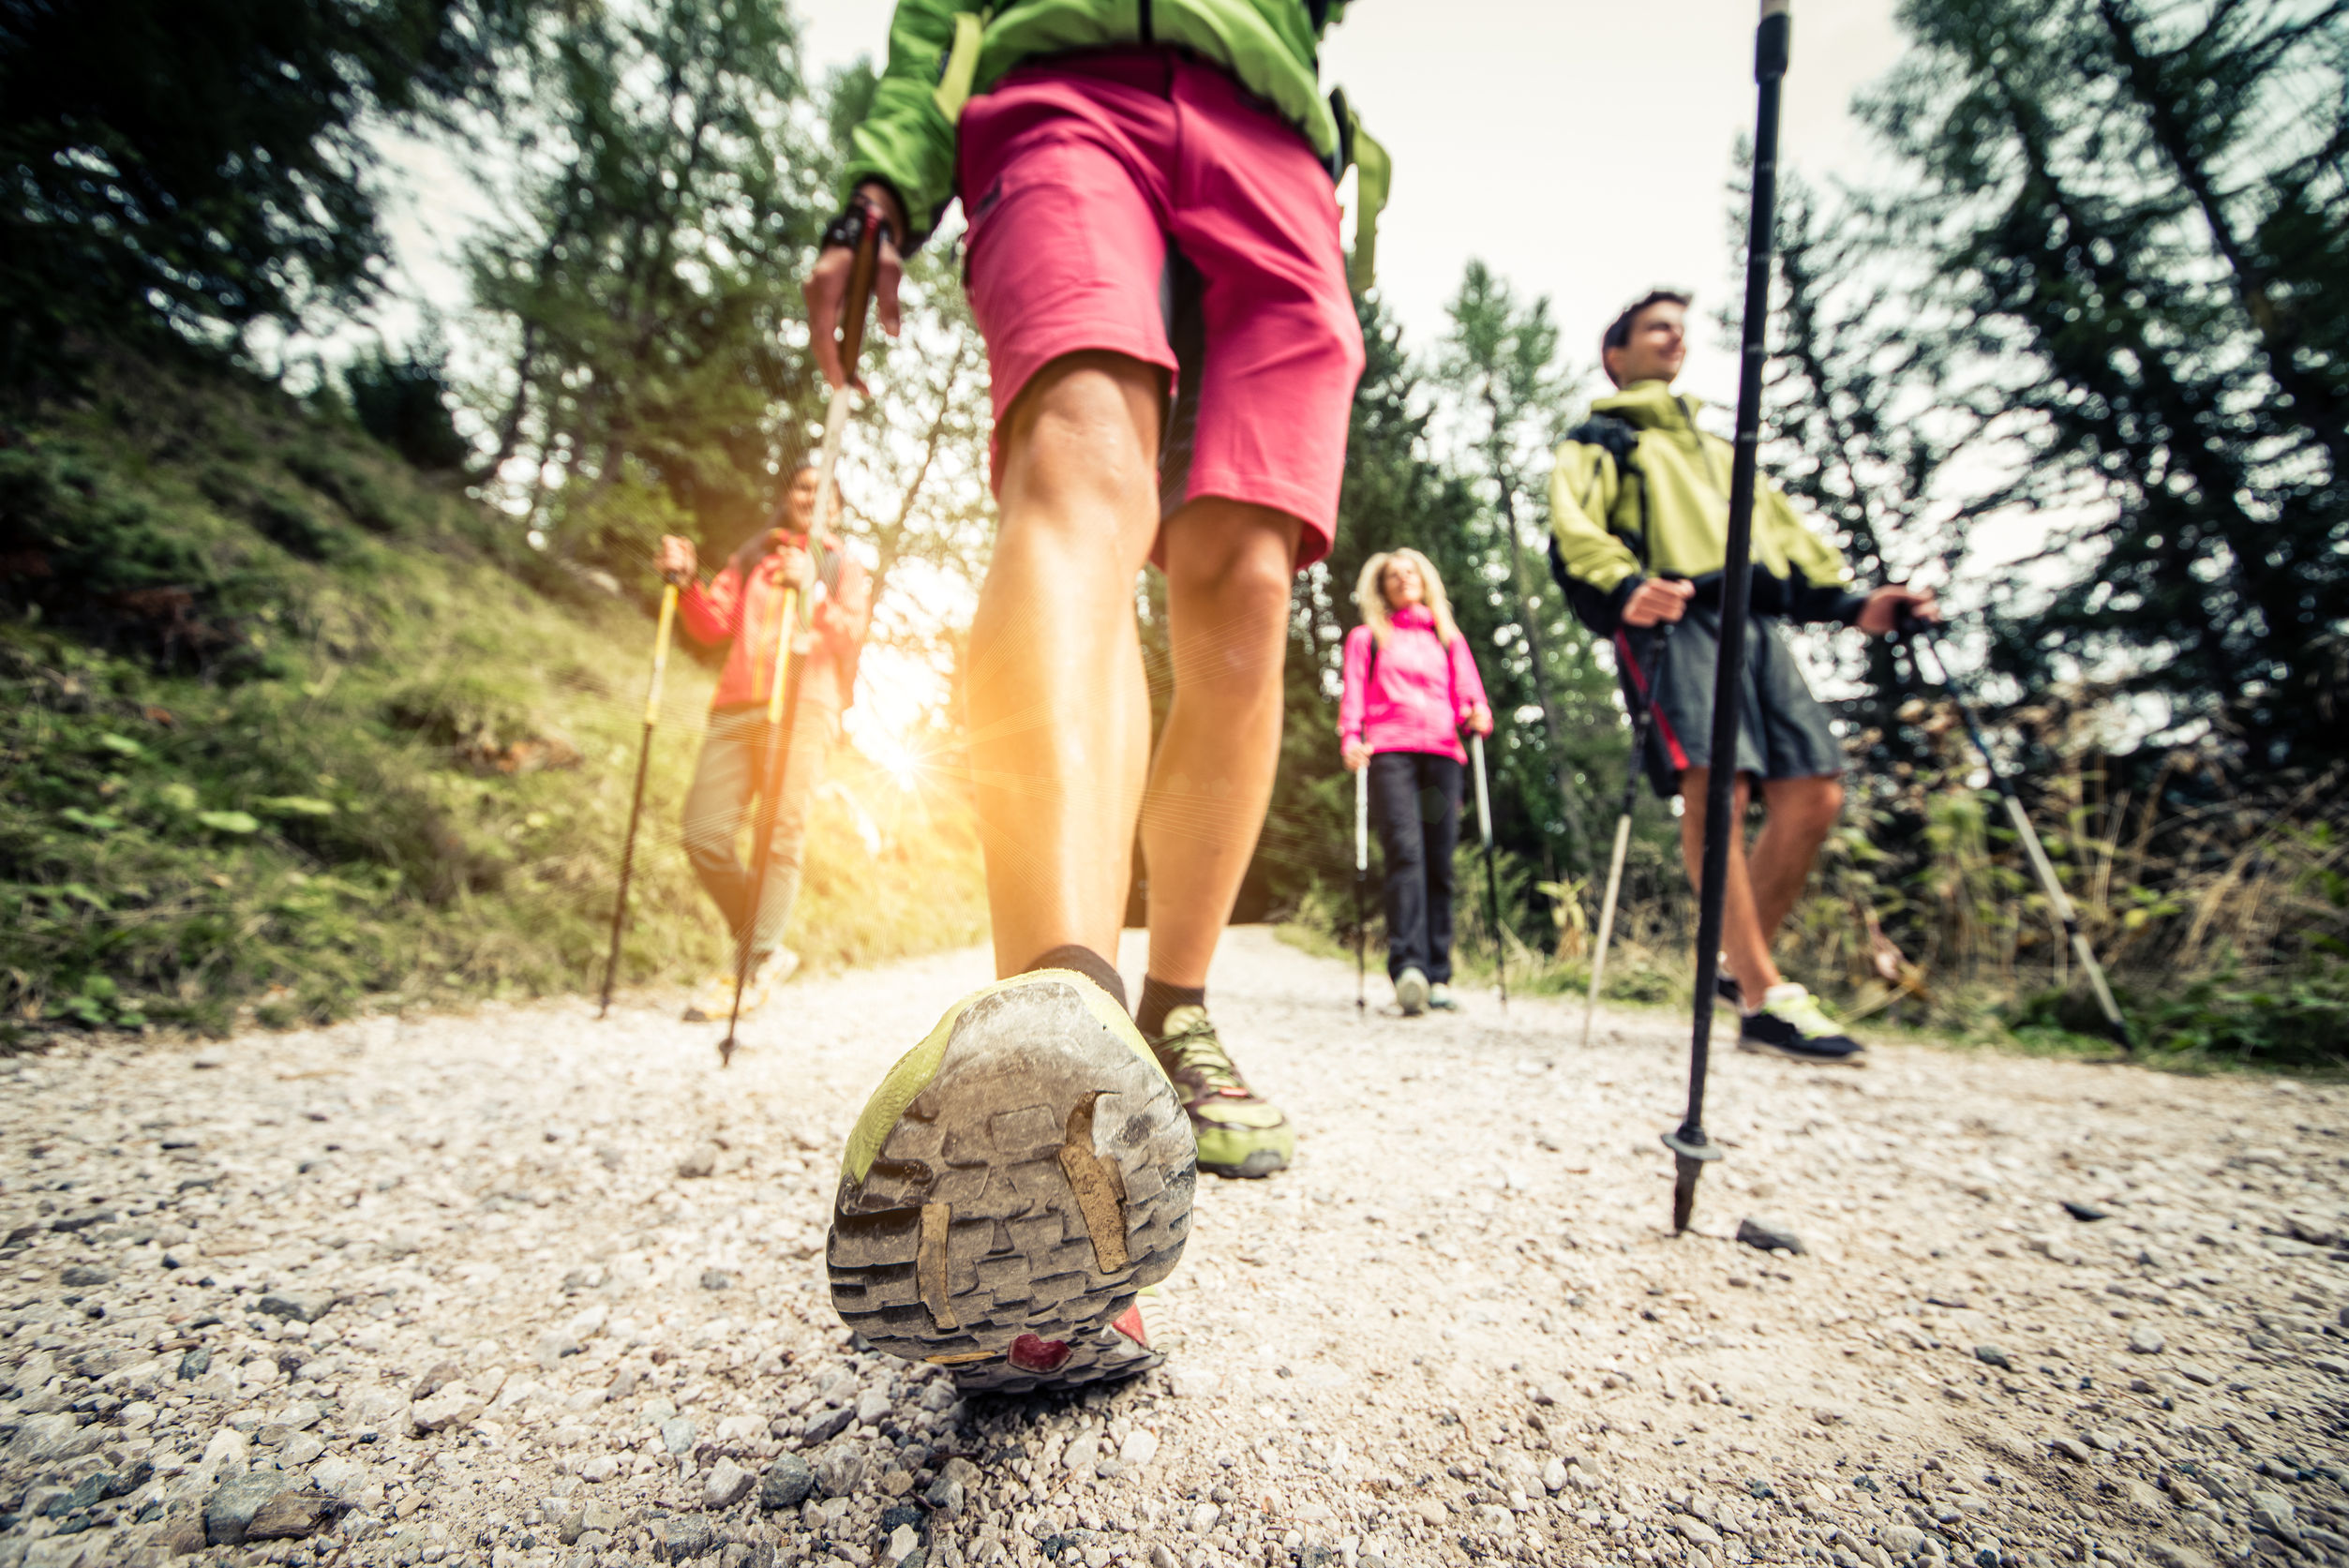 Going for a hike, Photo: Fabio Formaggio/123RF